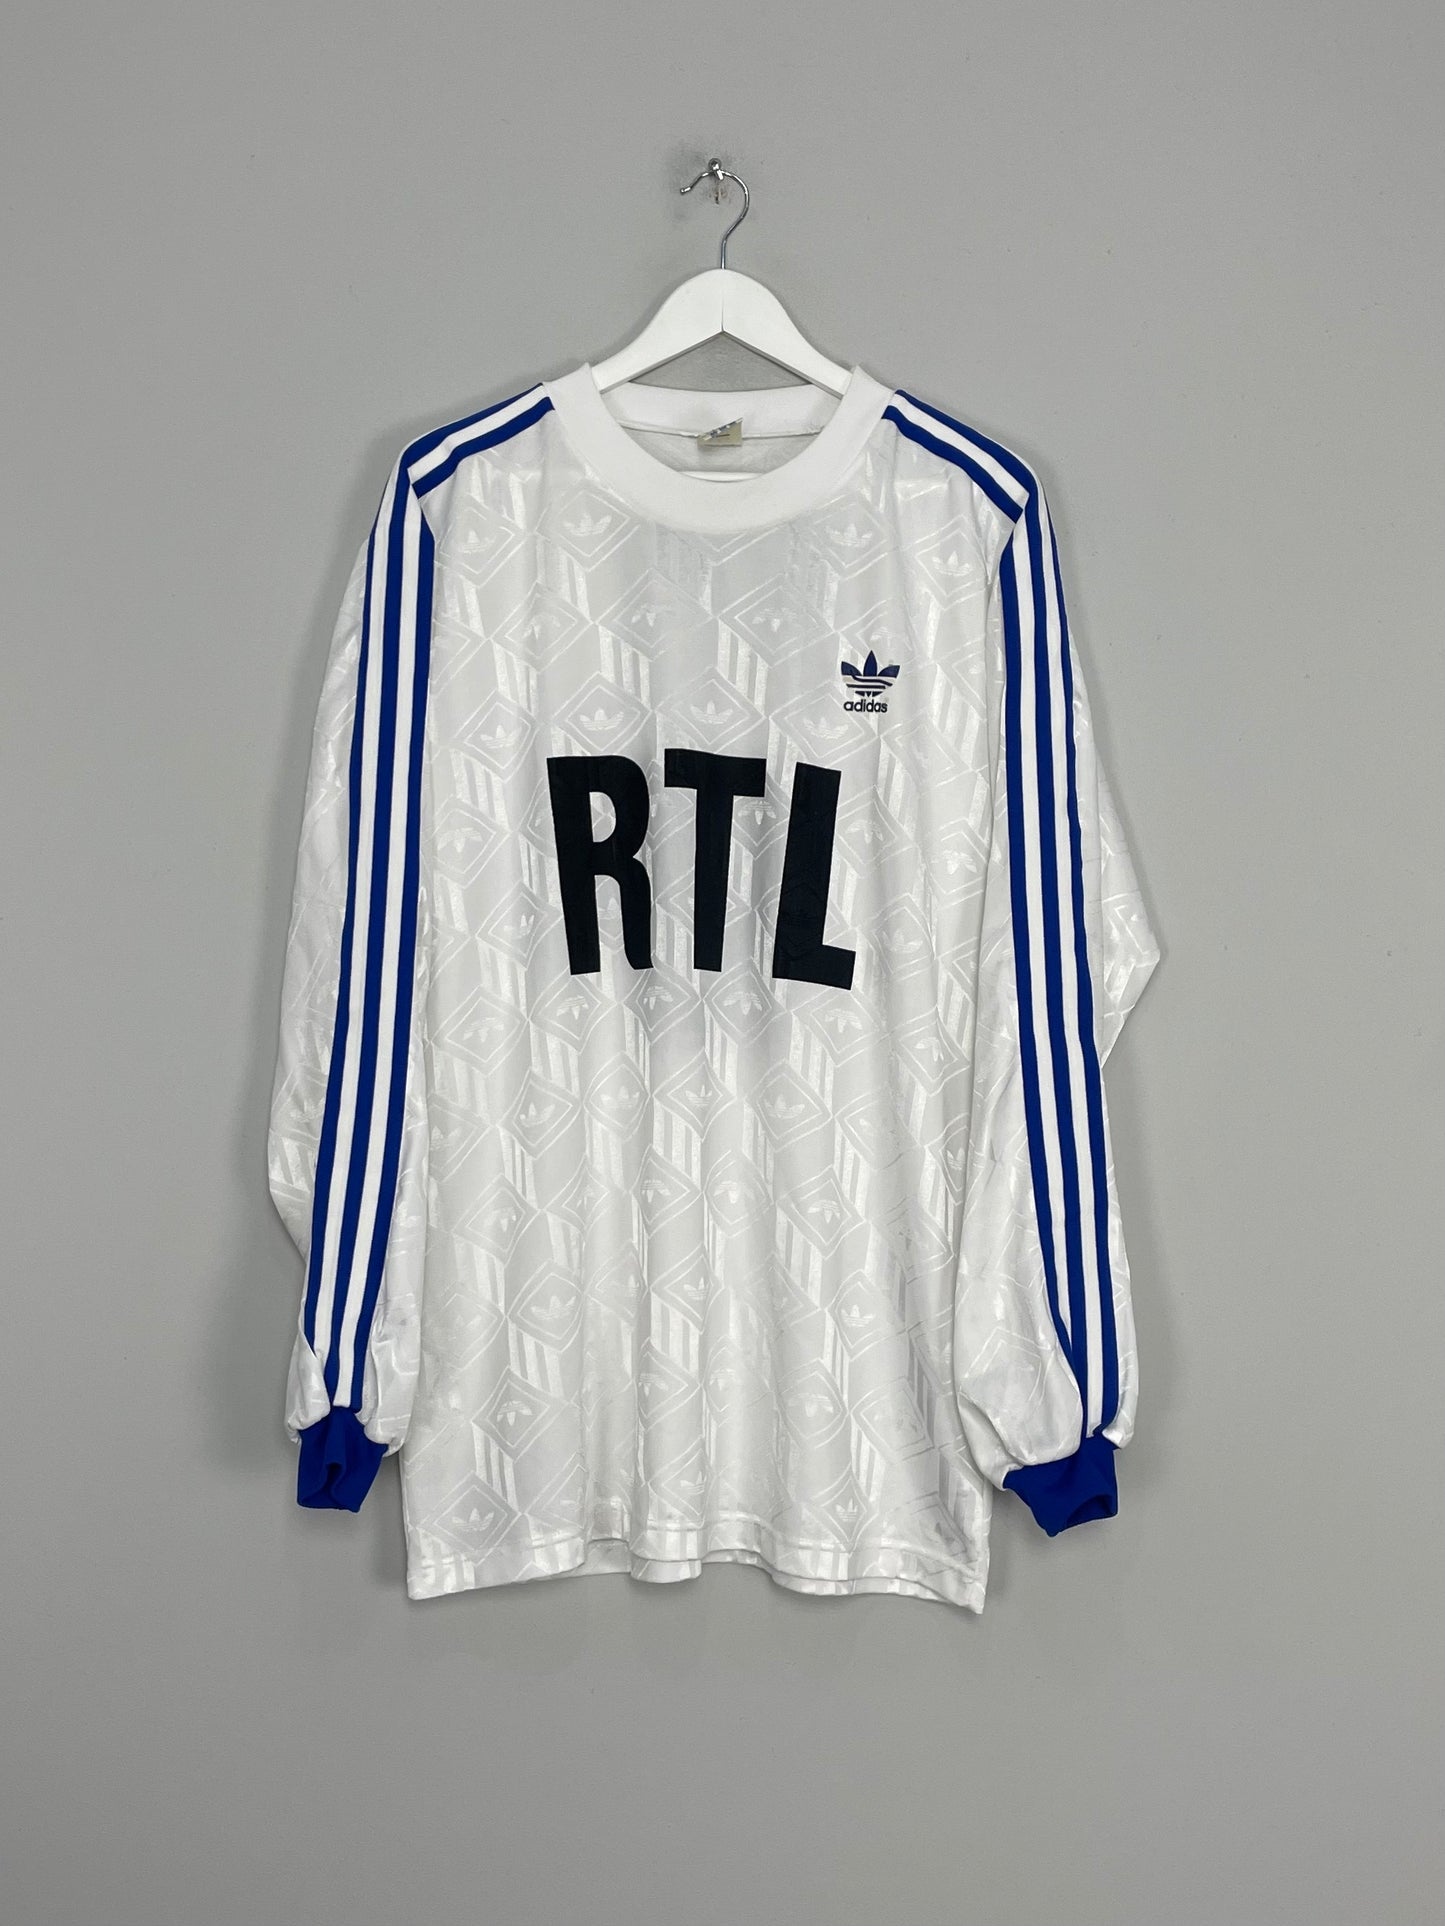 Image of the Coupe De France shirt from the 1993/94 season